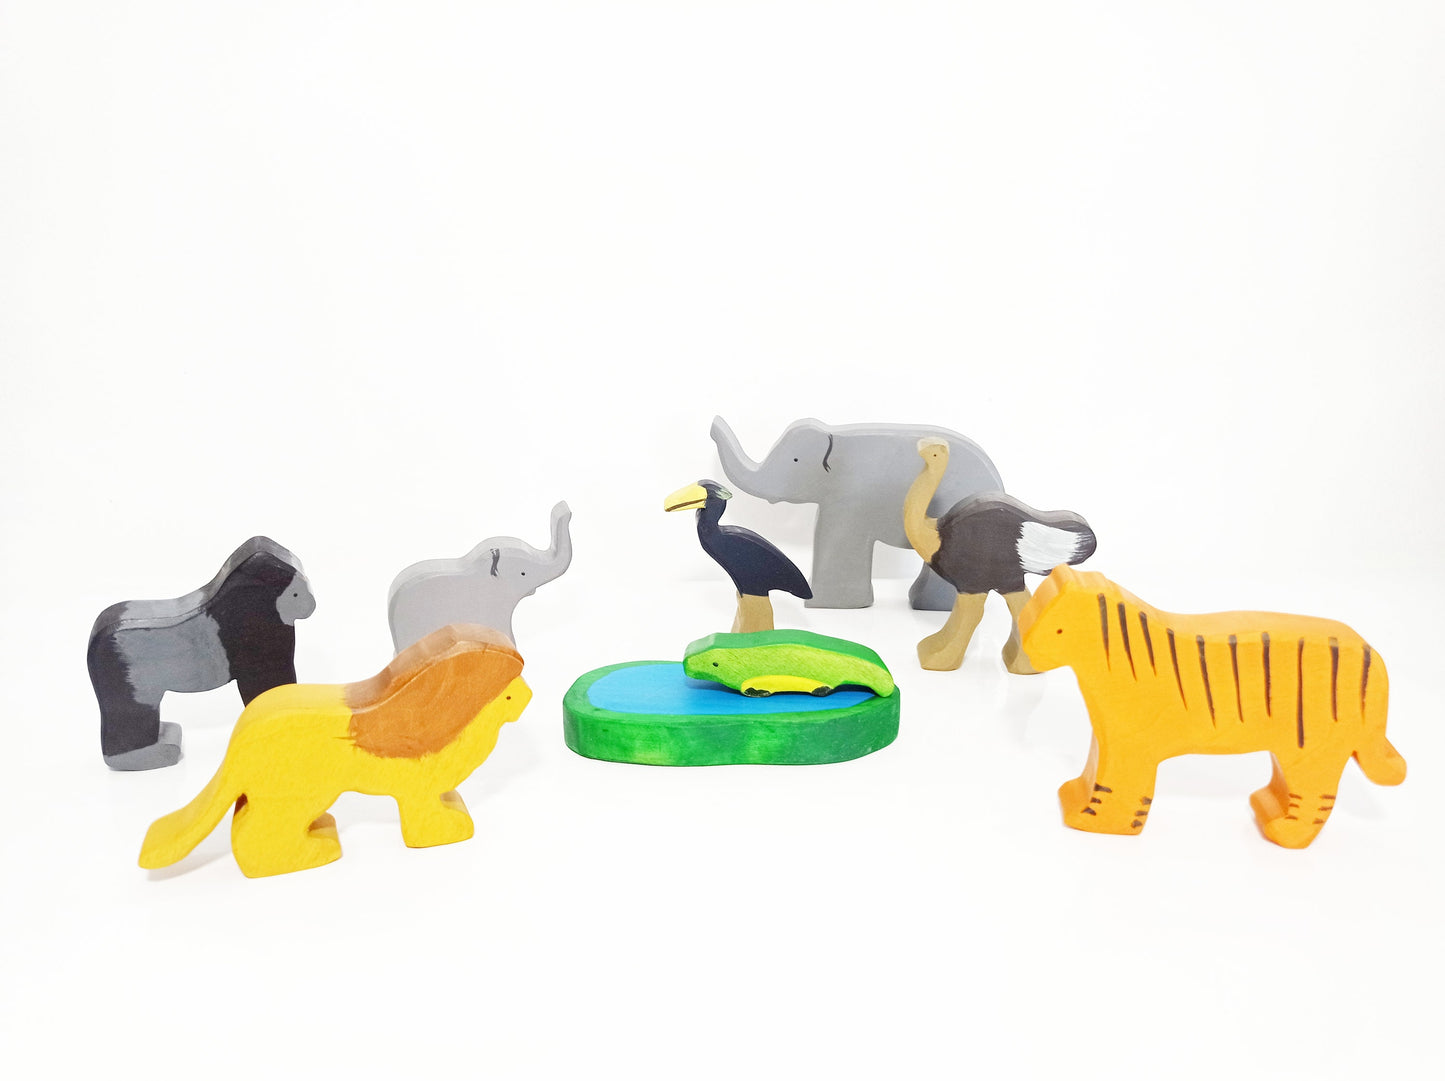 Exotic safari animals with lake wooden toy play set